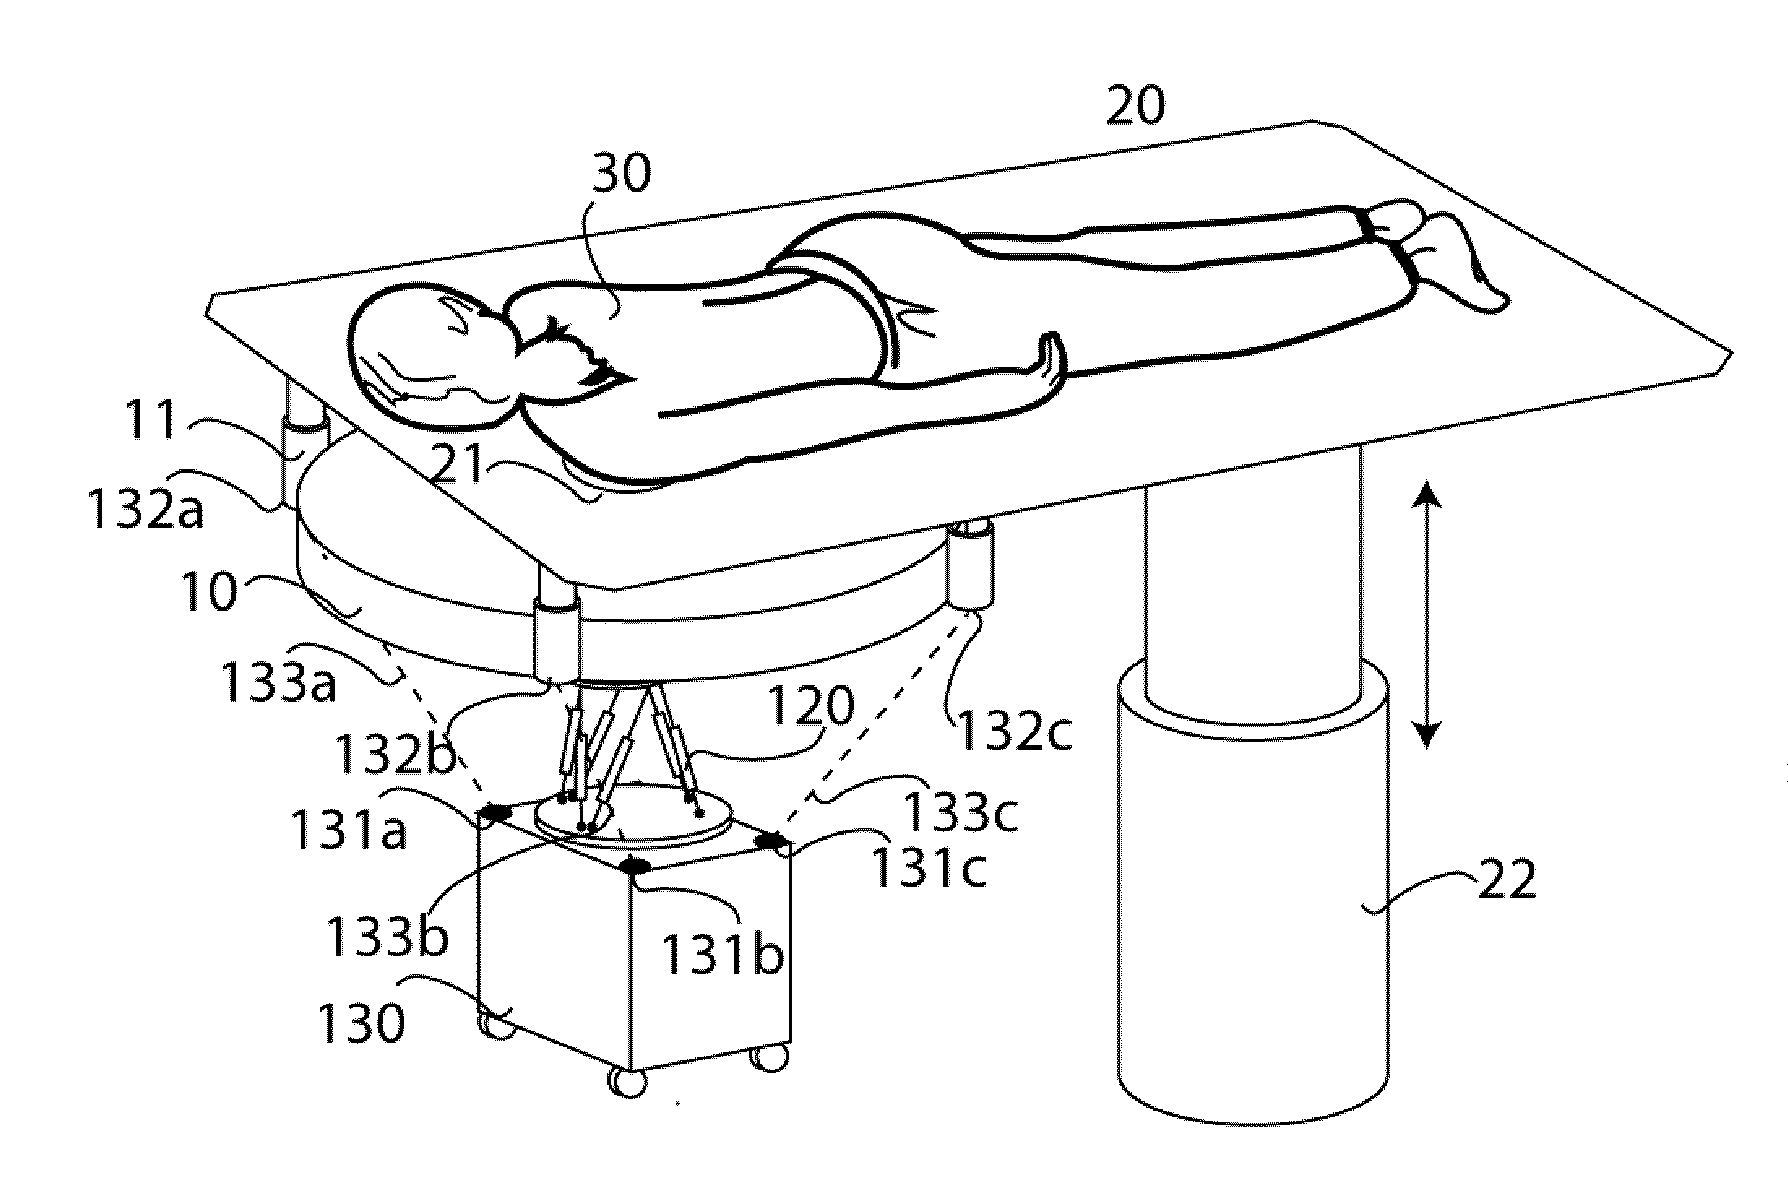 Modular System for Diagnosis and Surgical Operation on a Breast